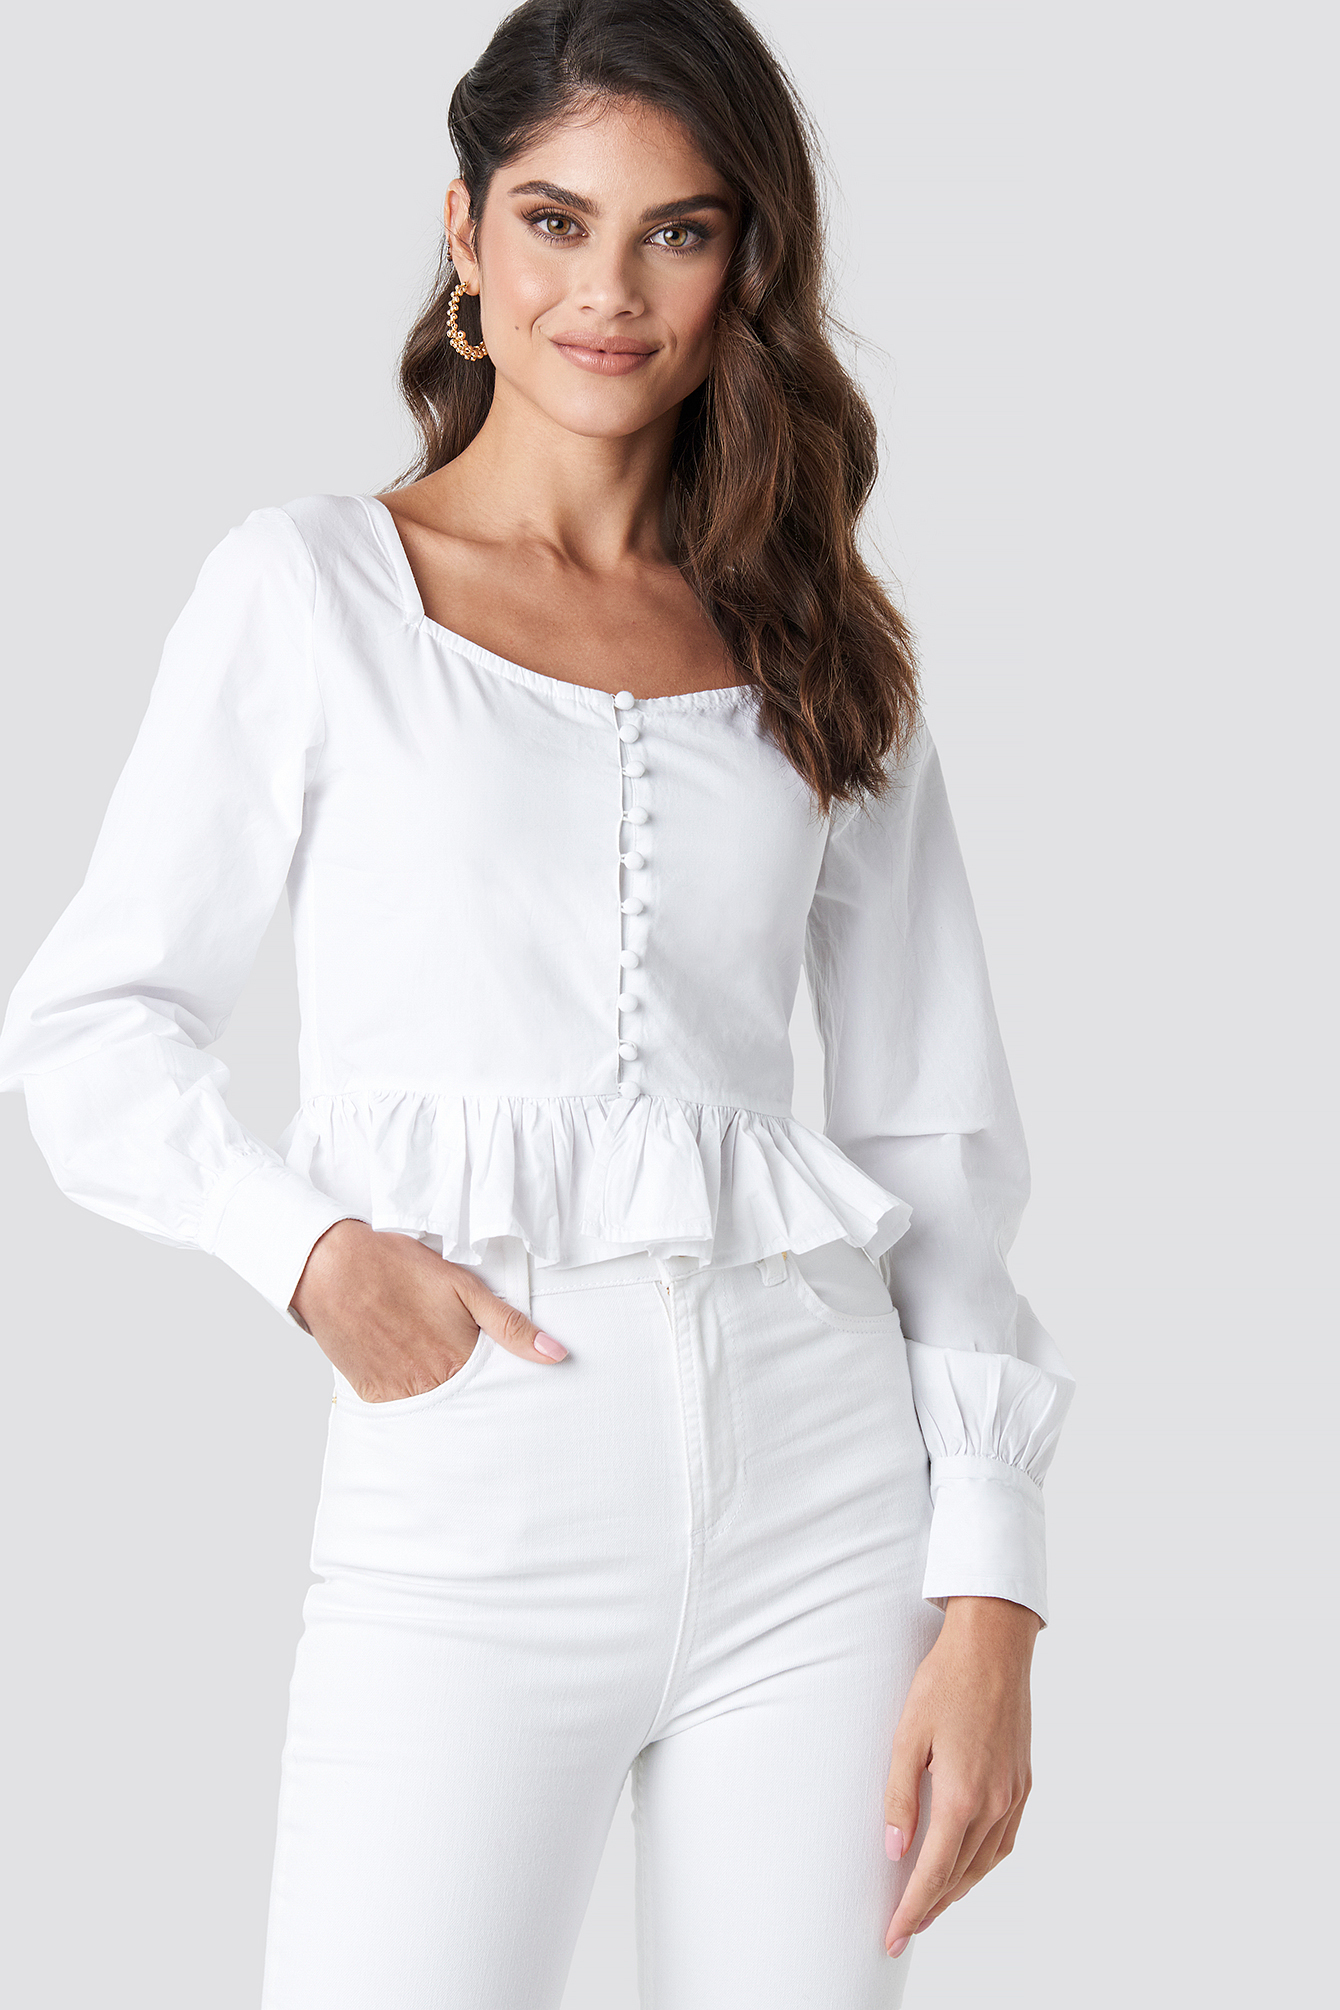 Frill Detailed Button Up Blouse White | na-kd.com - 1340 x 2010 jpeg 196kB